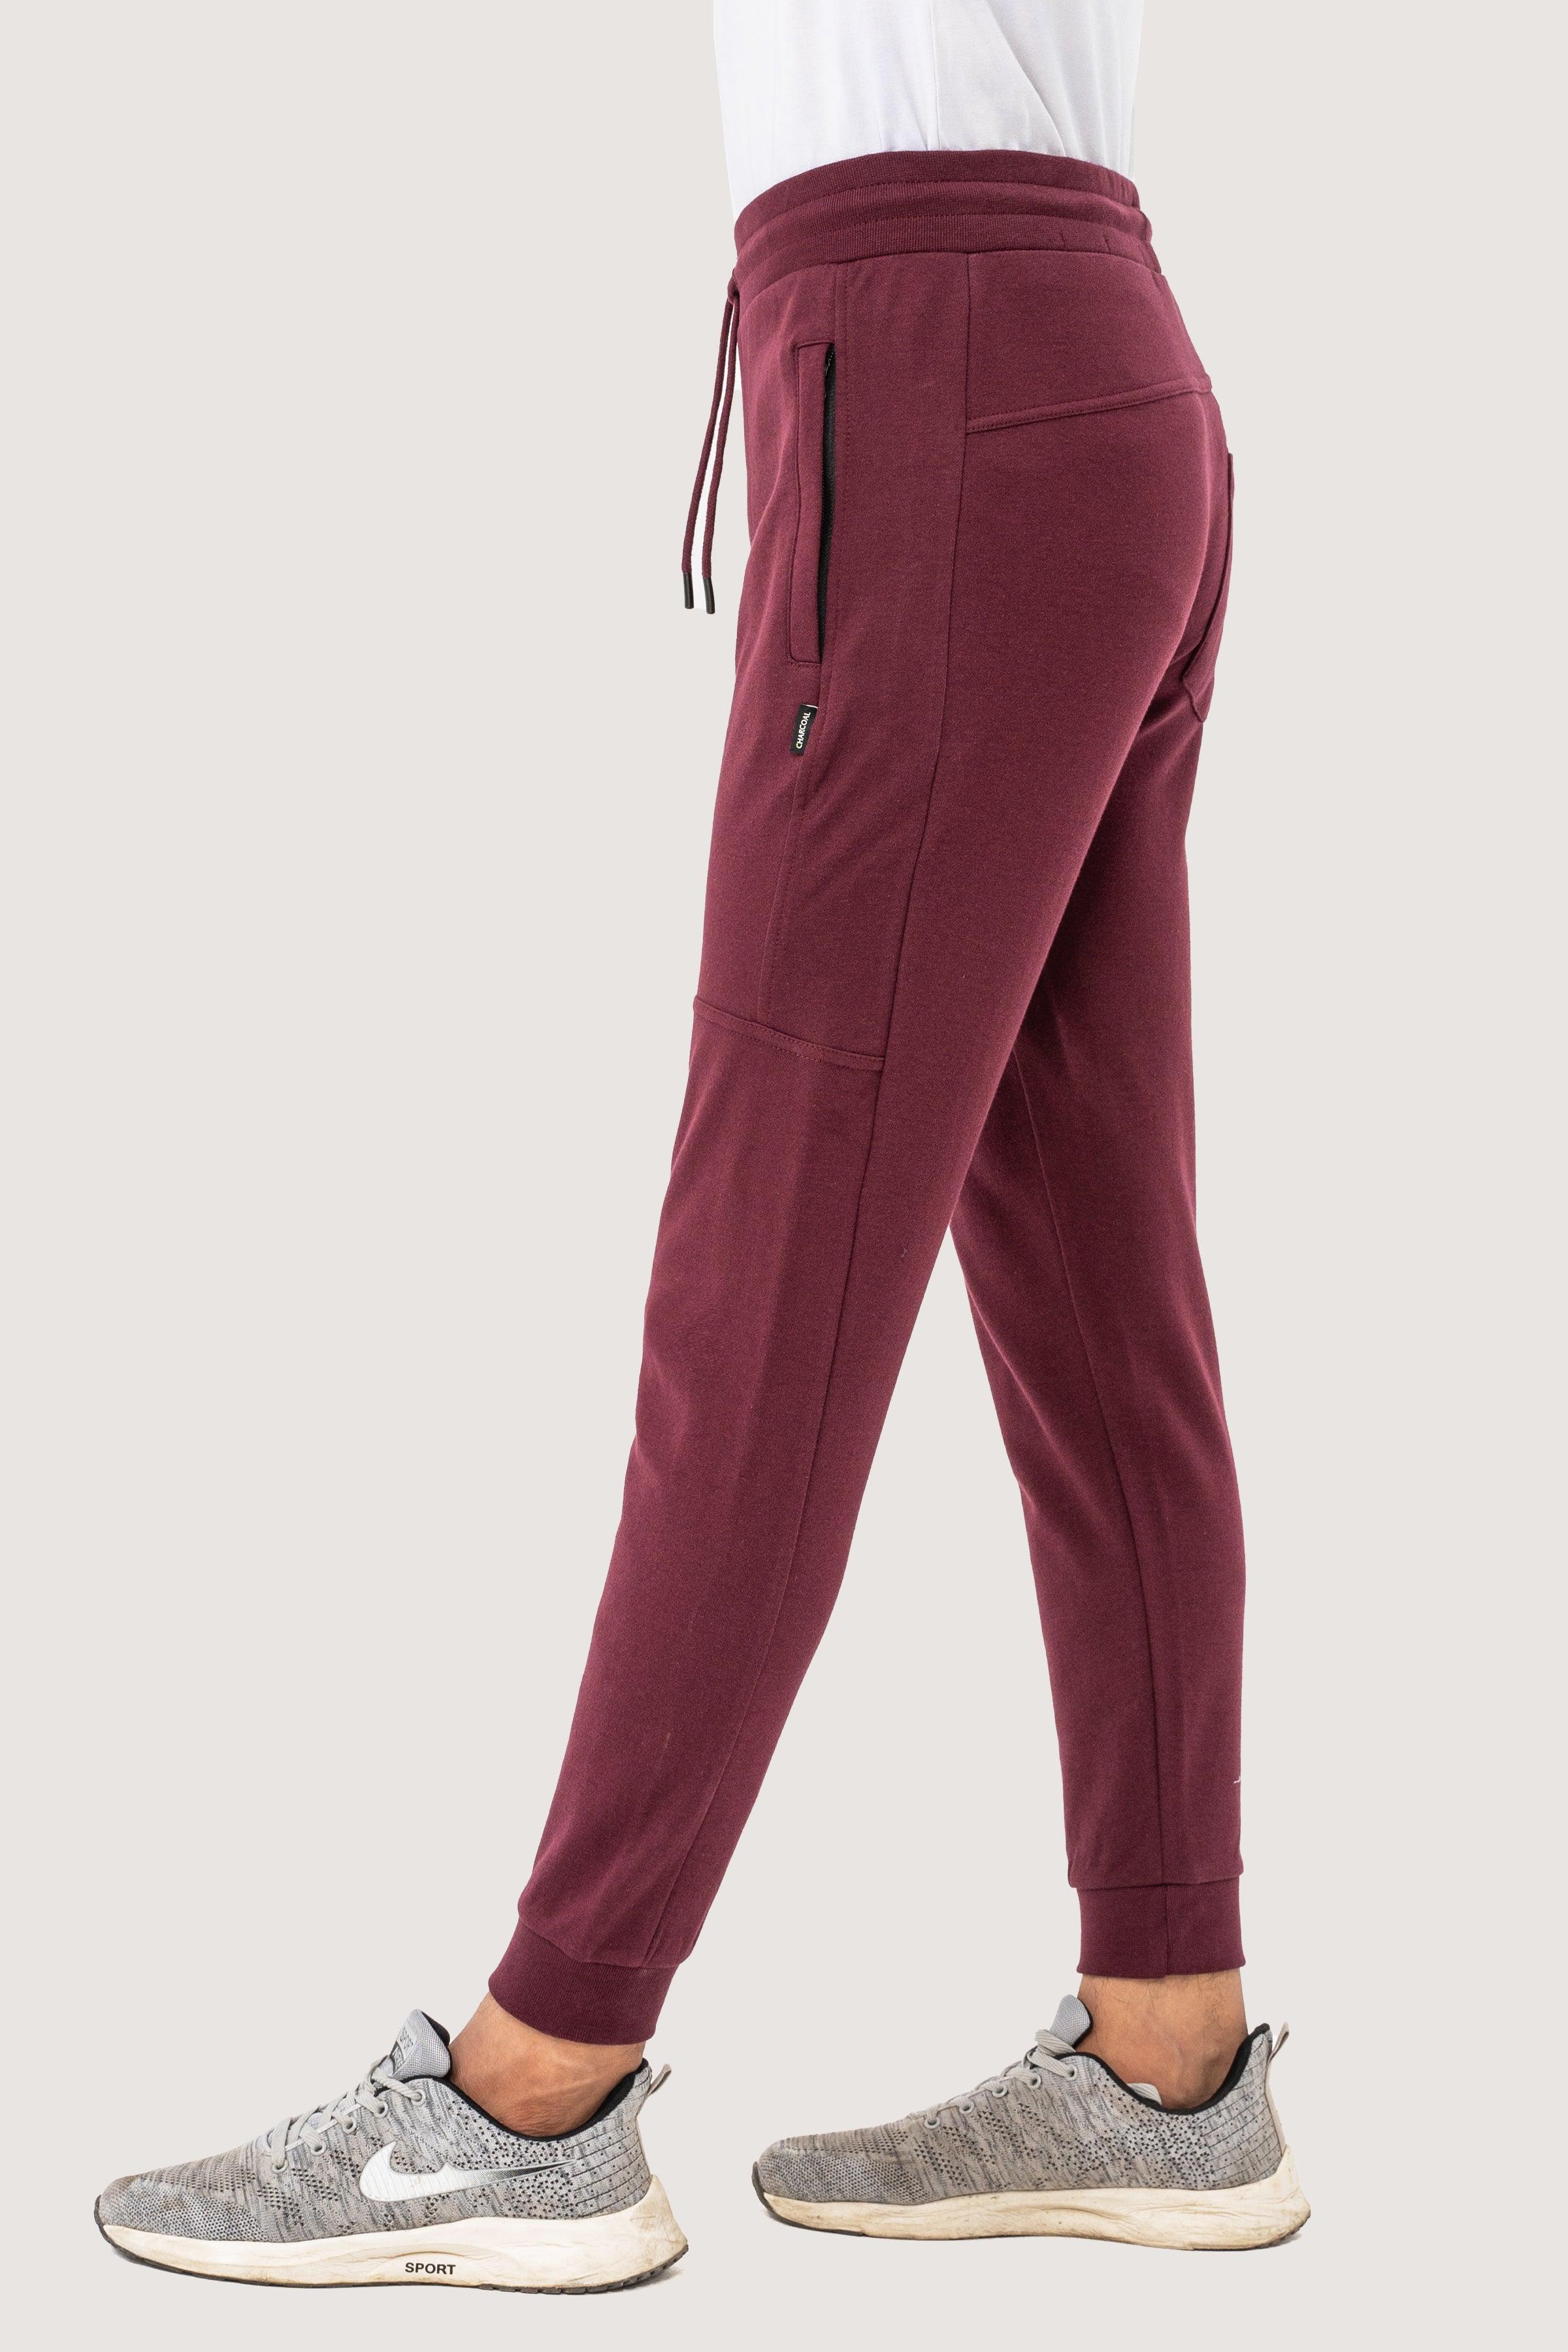 PIQUE INTERLOCK SLIMFIT TROUSER MAROON at Charcoal Clothing